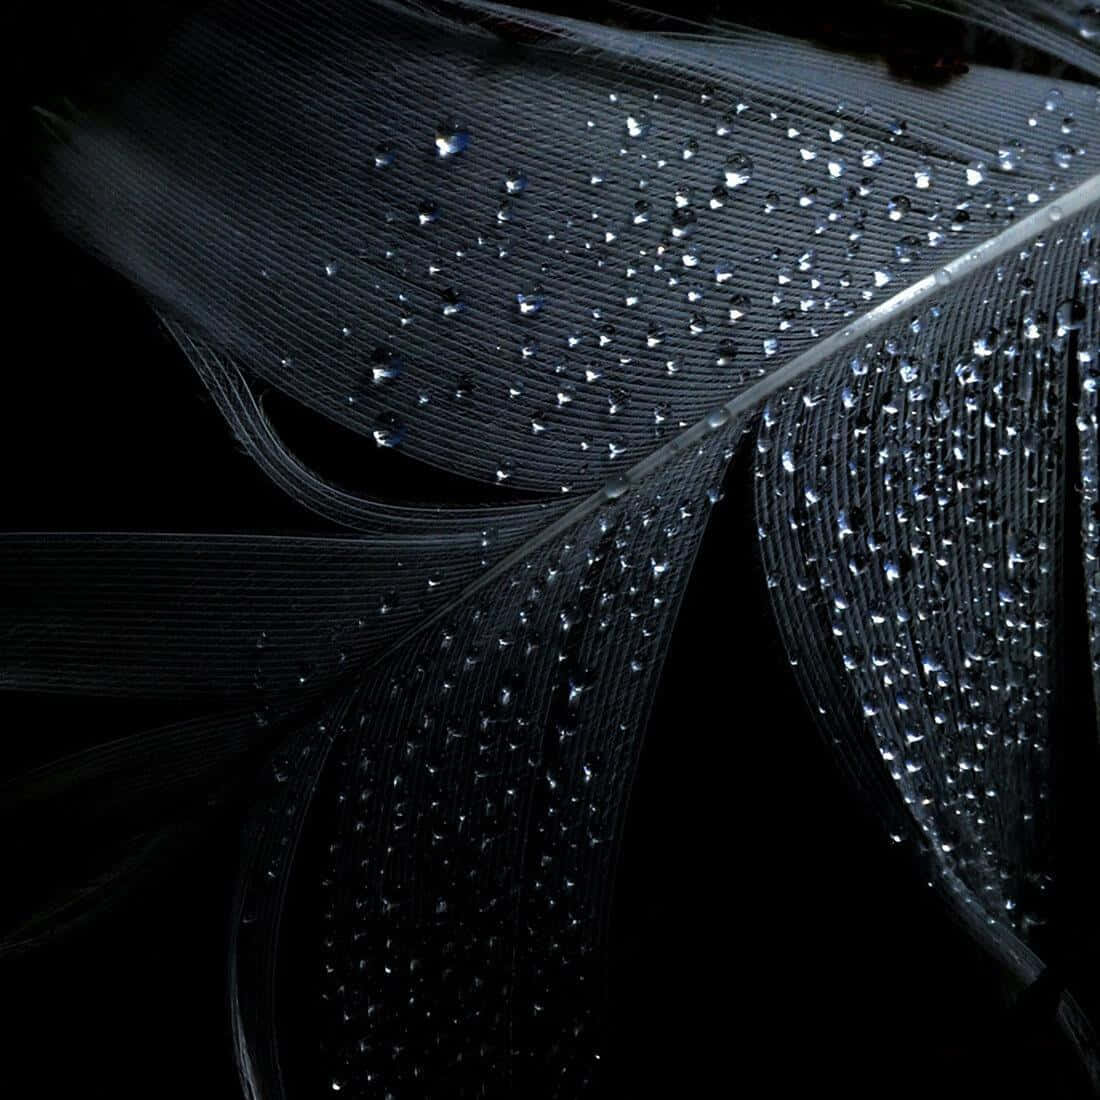 A Black Feather With Water Droplets On It